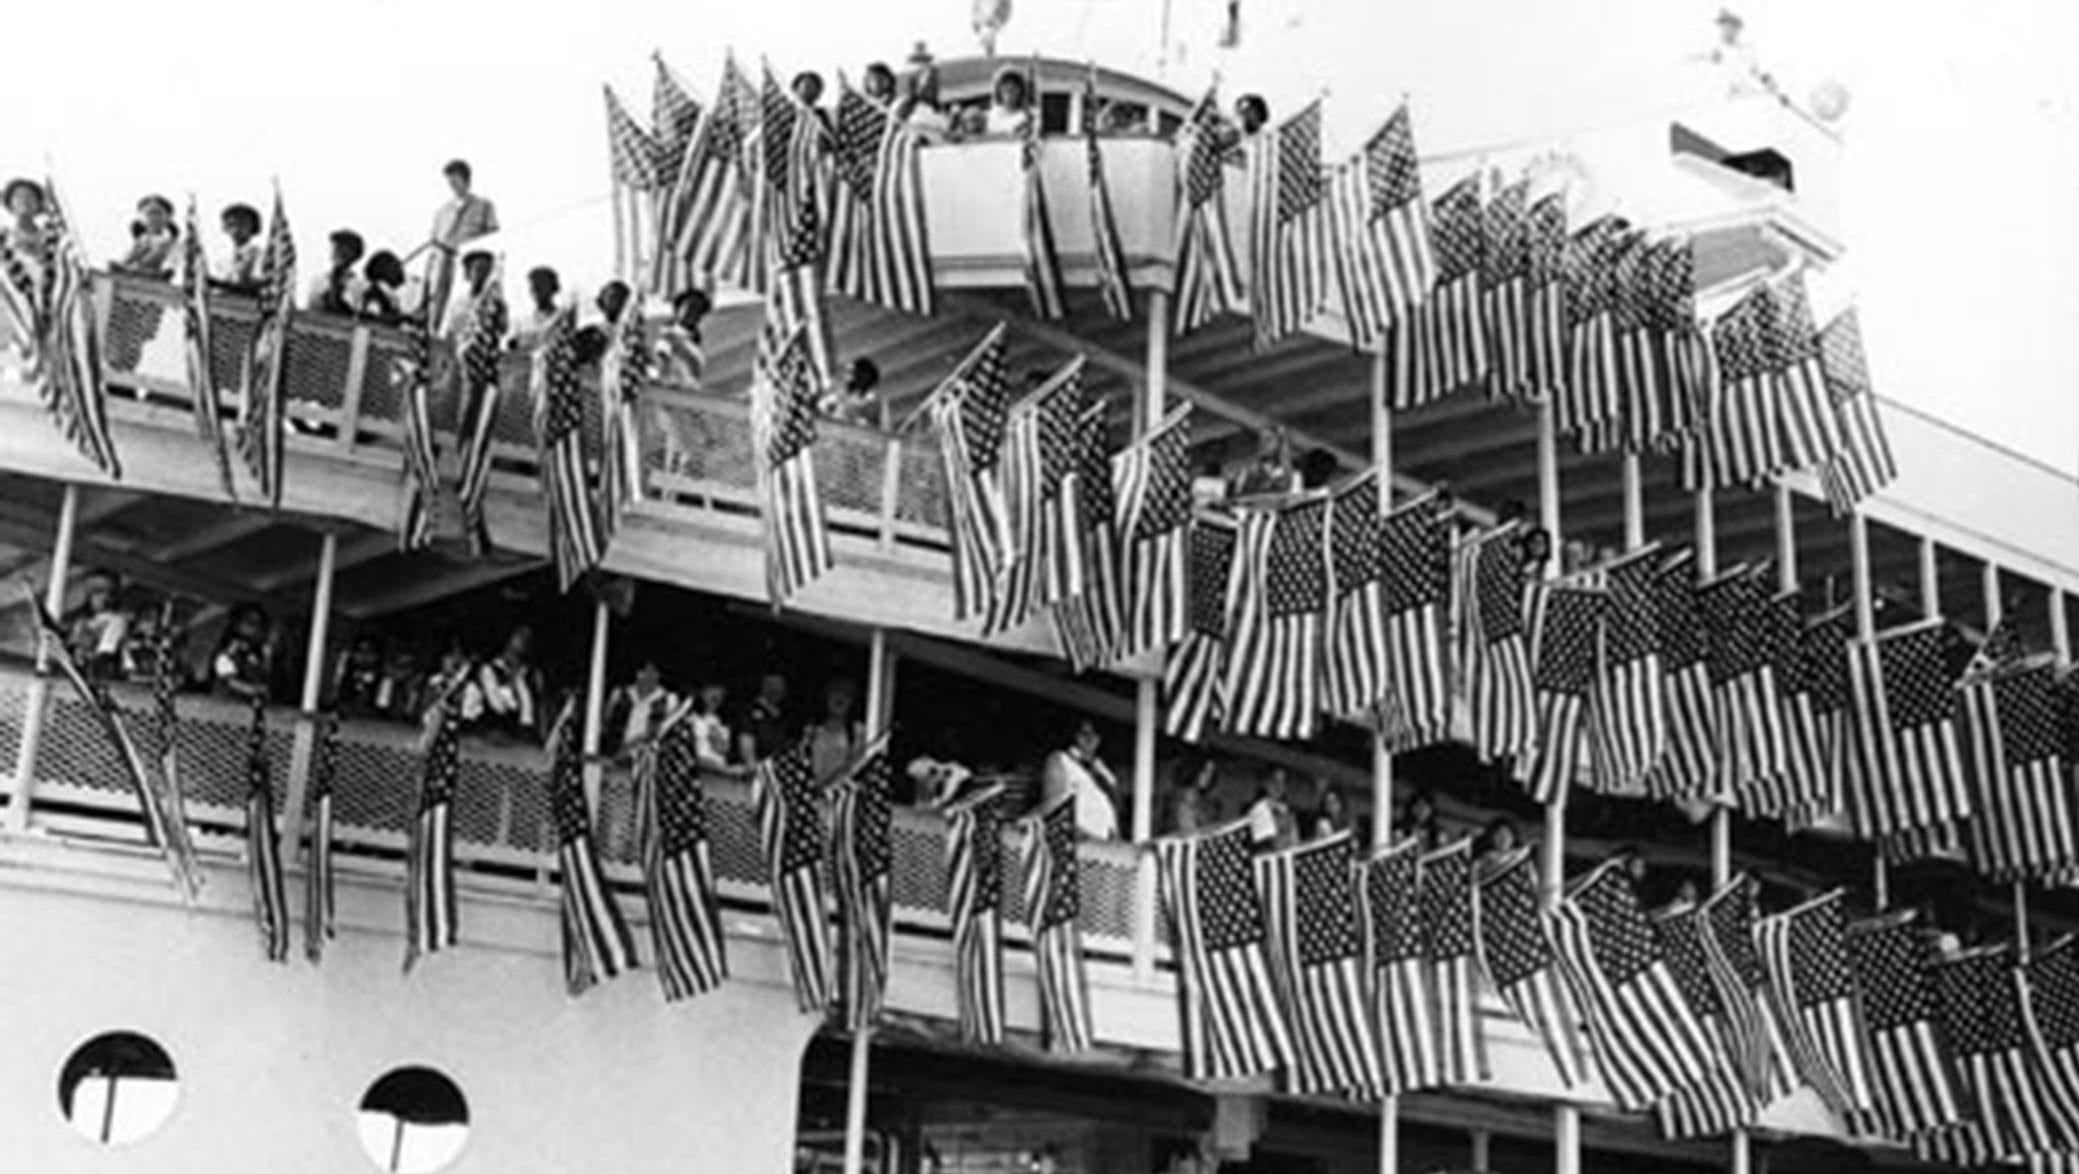 American flags grace the Ste. Claire during a Girl Scout outing on July 4, 1981.